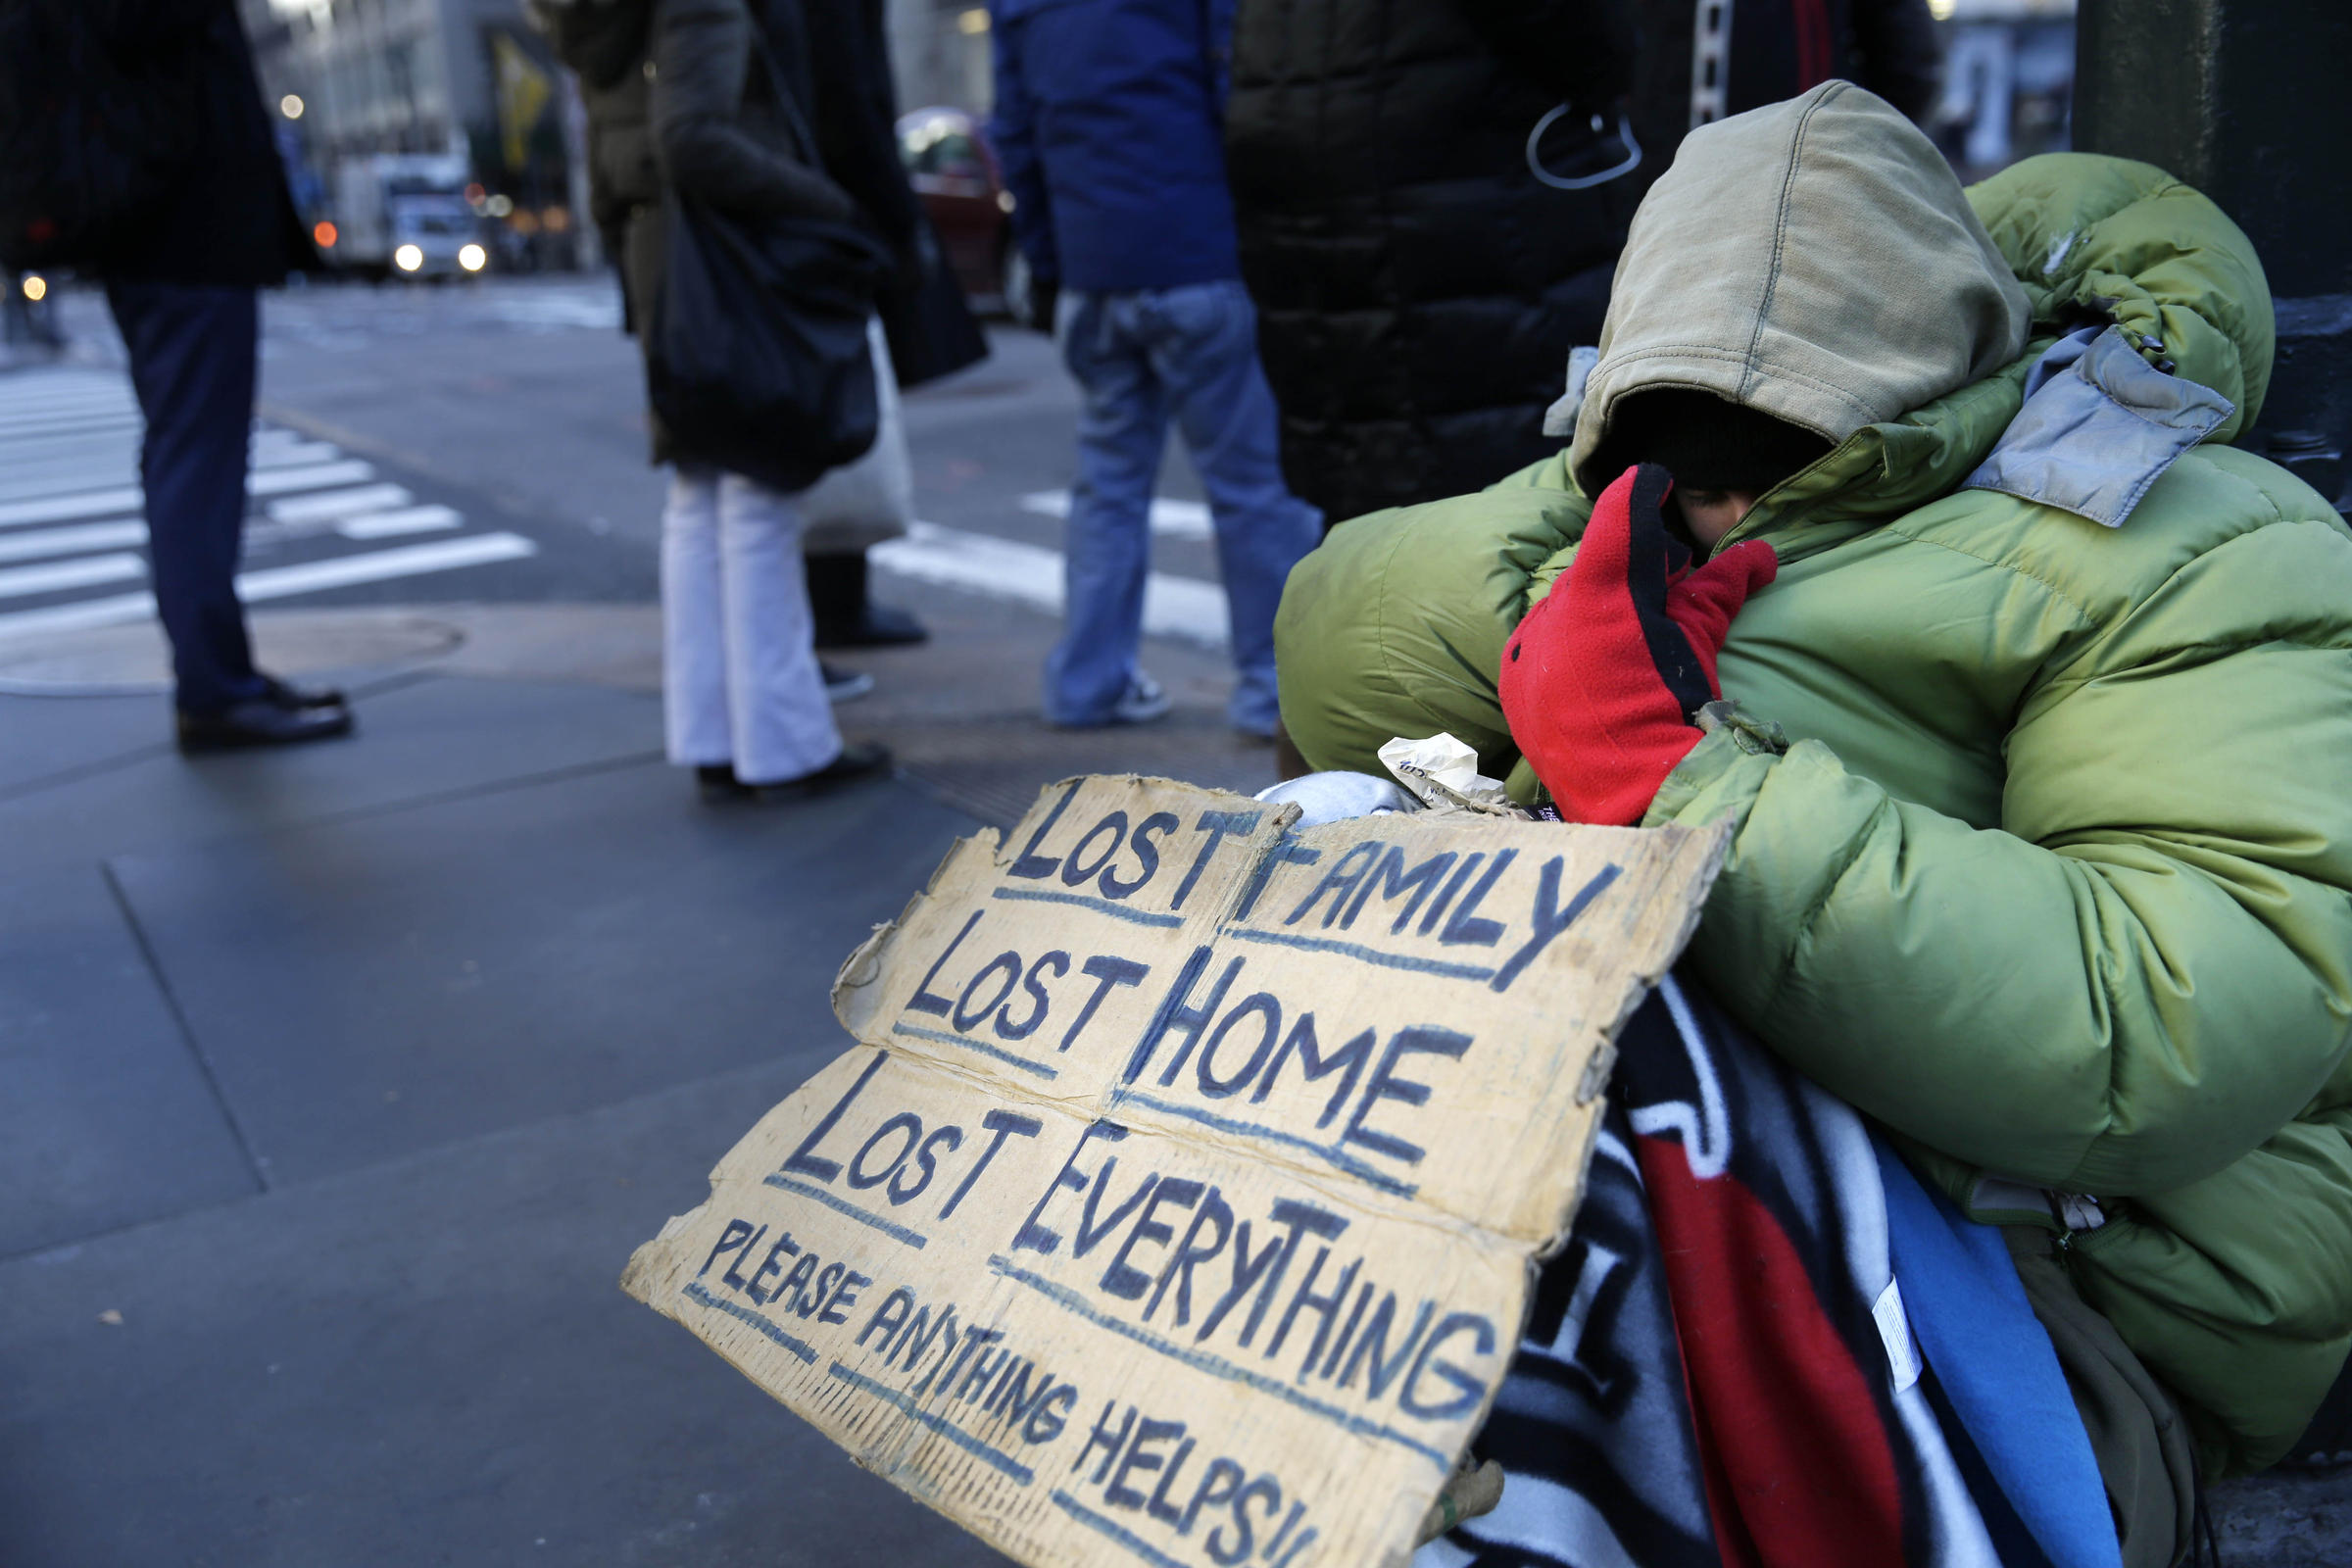 Report: N.Y. Homeless Shelters Rundown, Advocates Push For More Funding ...